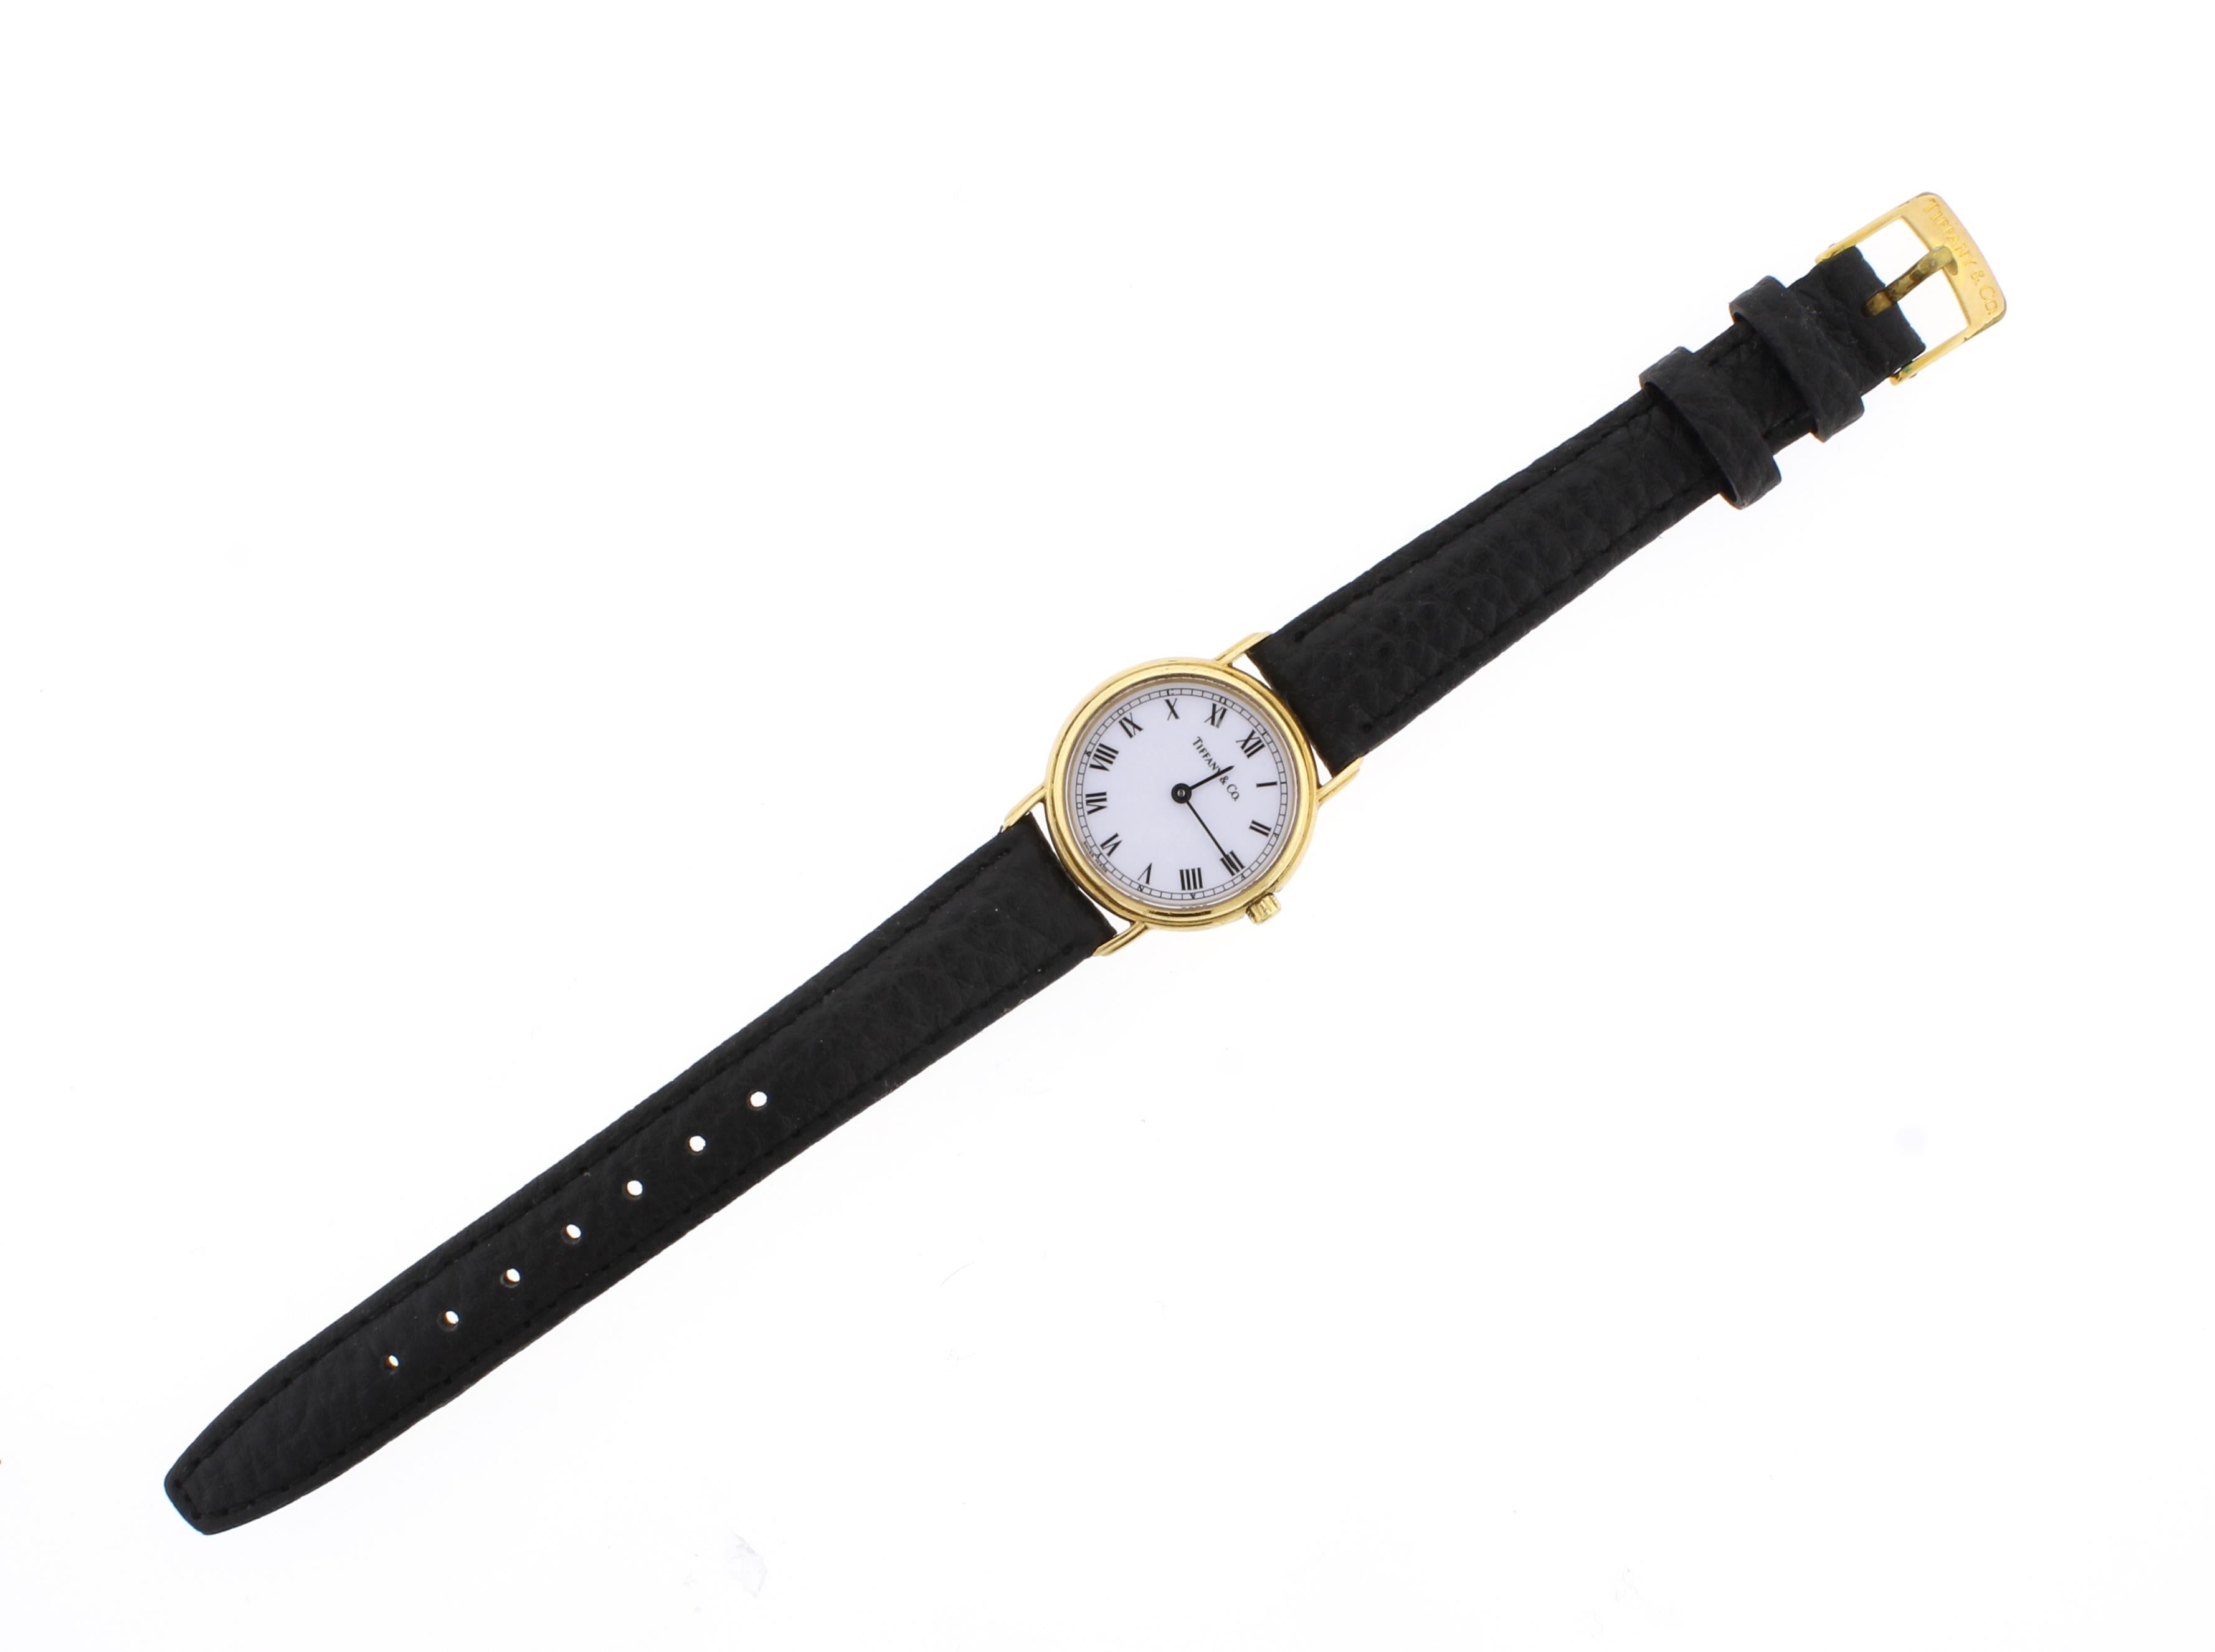 From Tiffany & Co. a ladies wrist watch
♦ Designer: Tiffany & Co.
♦ Metal: 18 karat
♦ Dial: round, white, black Roman numeral hour markers, black outer minute track, black baton hands
♦ Case:  28mm round, snap back, inside: L253,    
♦ Circa 1995
♦